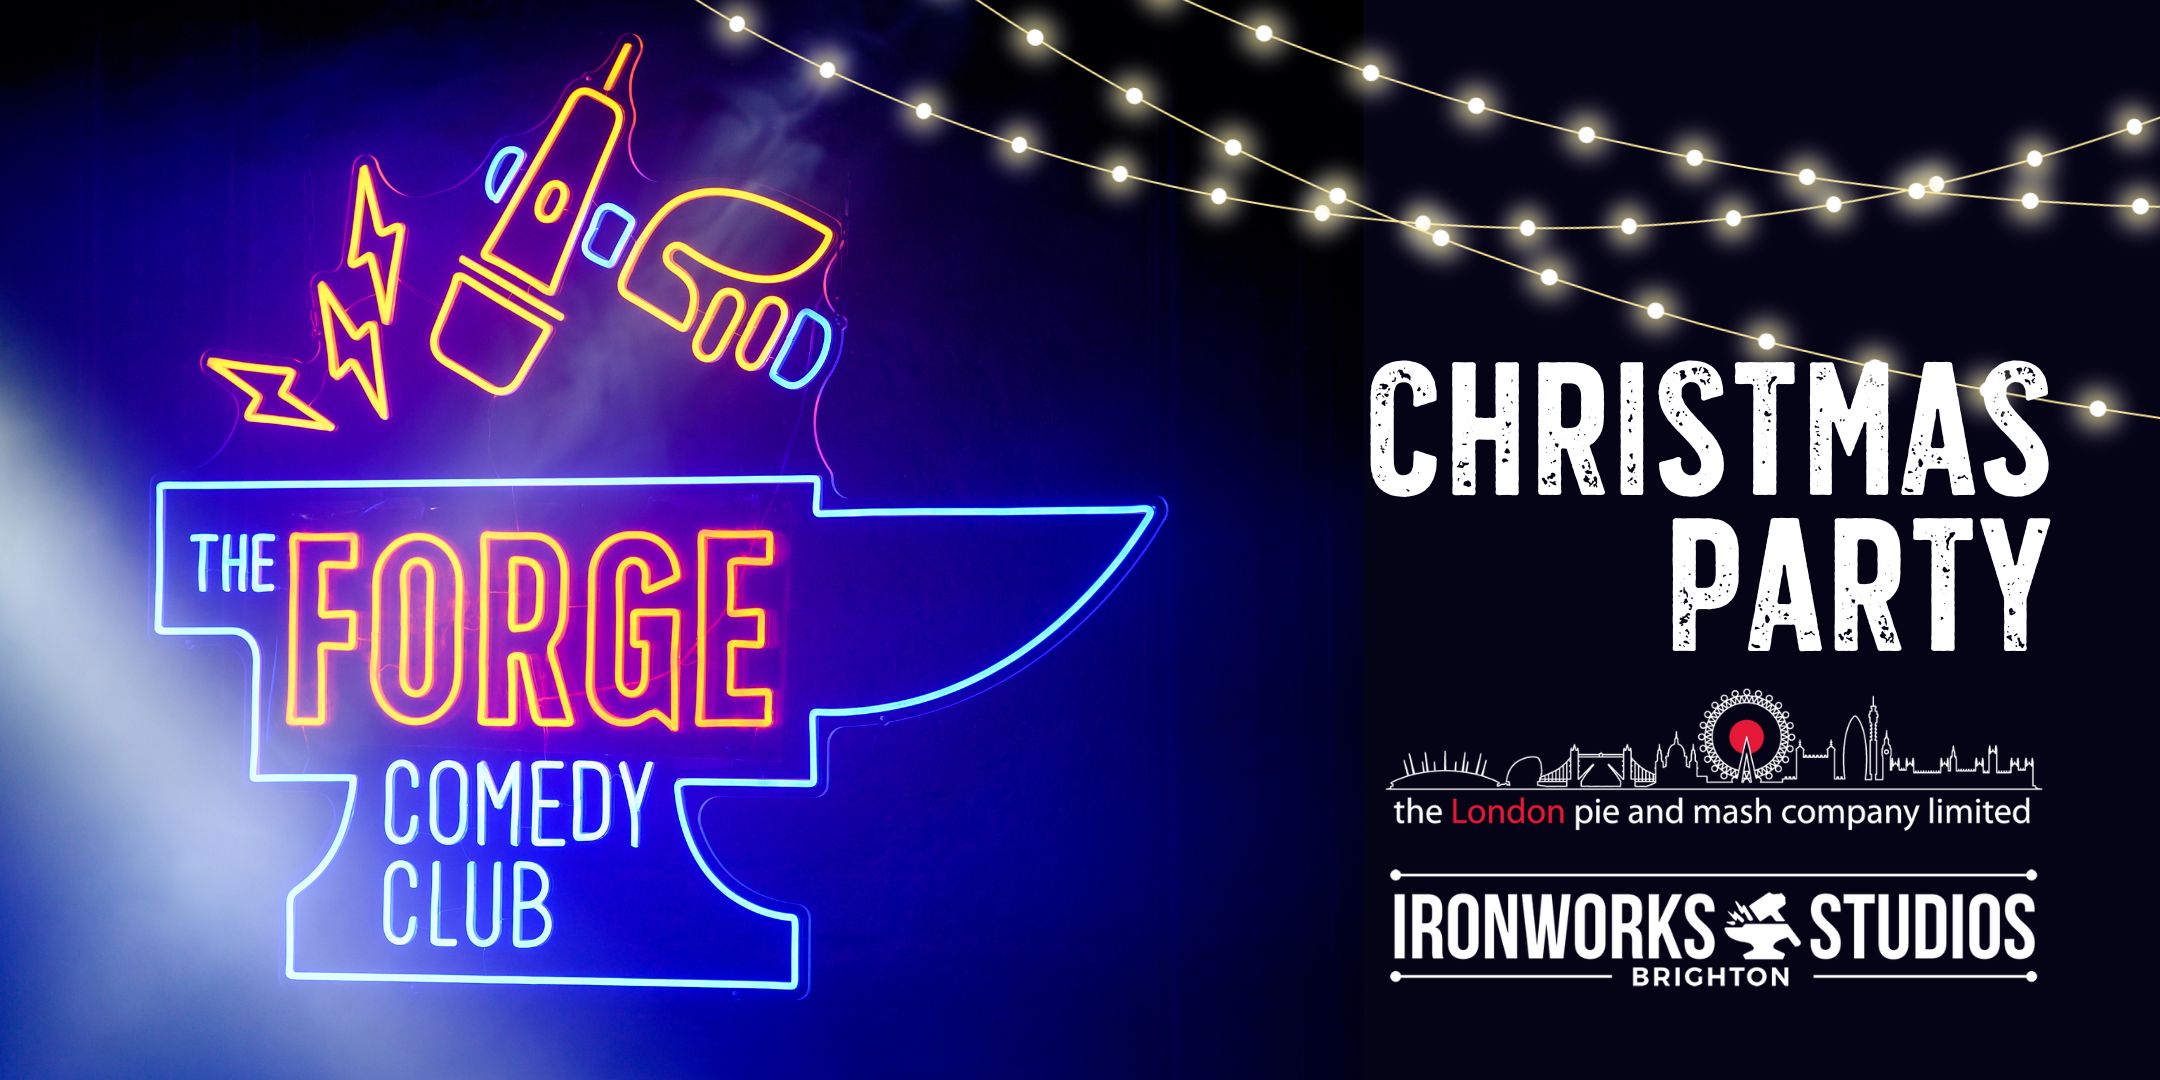 1st December: The Forge Comedy Club Christmas Party